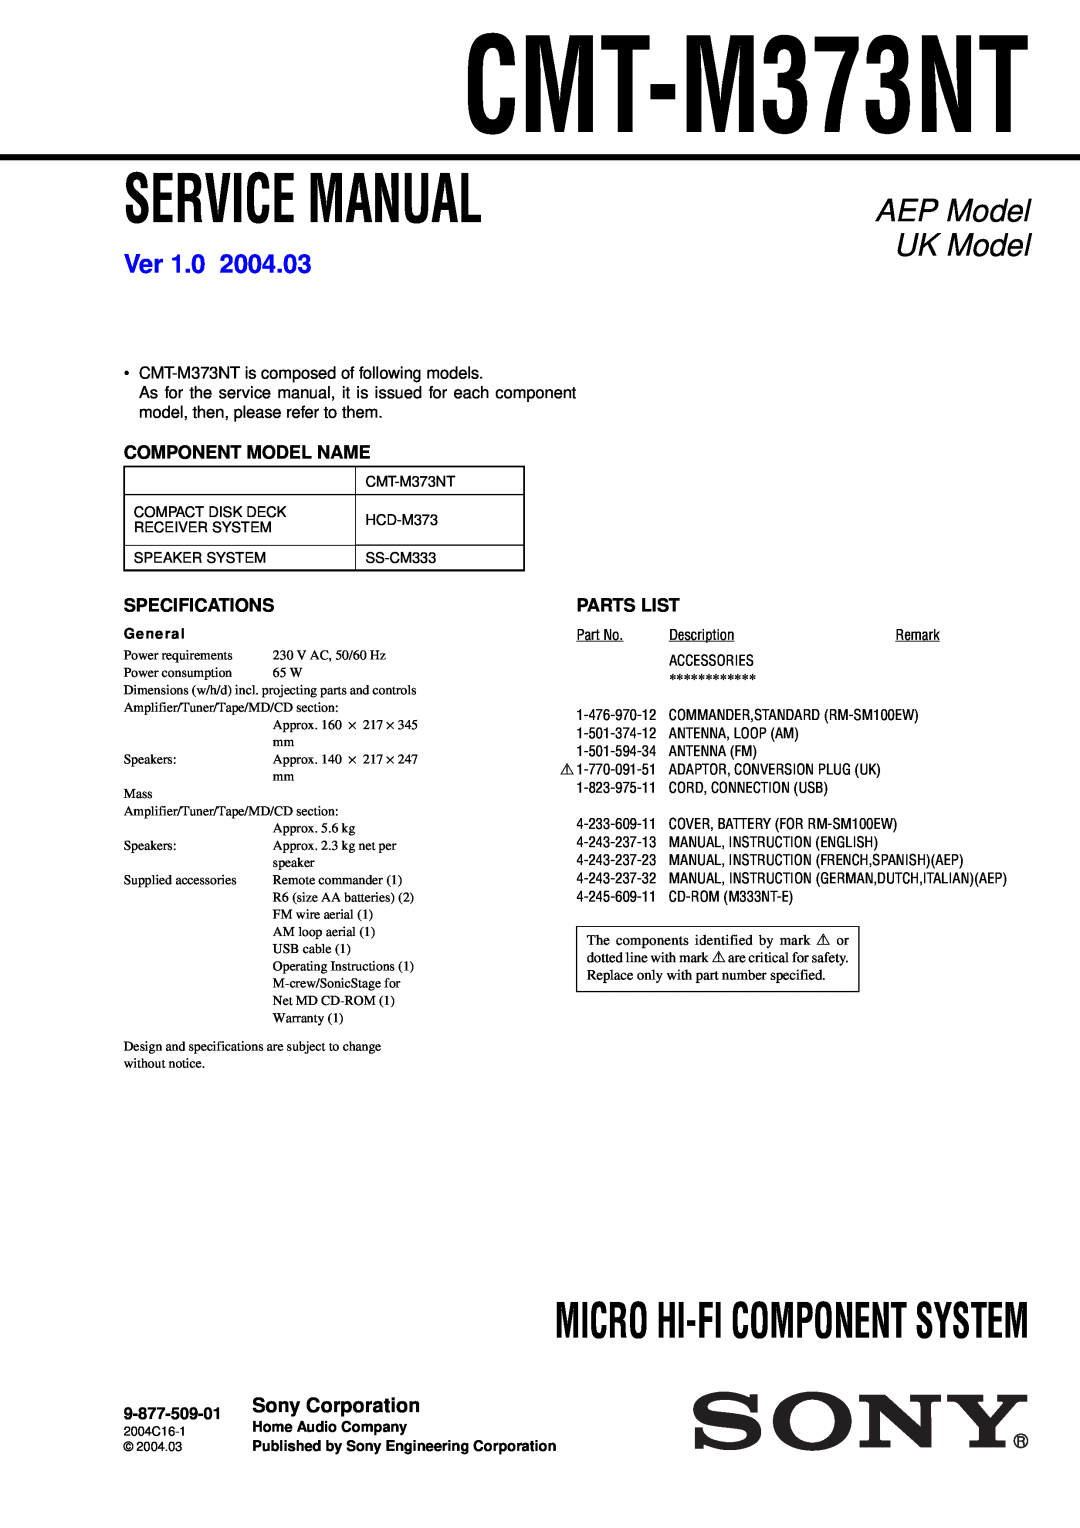 Sony CMT-M373NT service manual Micro Hi-Ficomponent System, UK Model, AEP Model, Ver, Sony Corporation, Specifications 